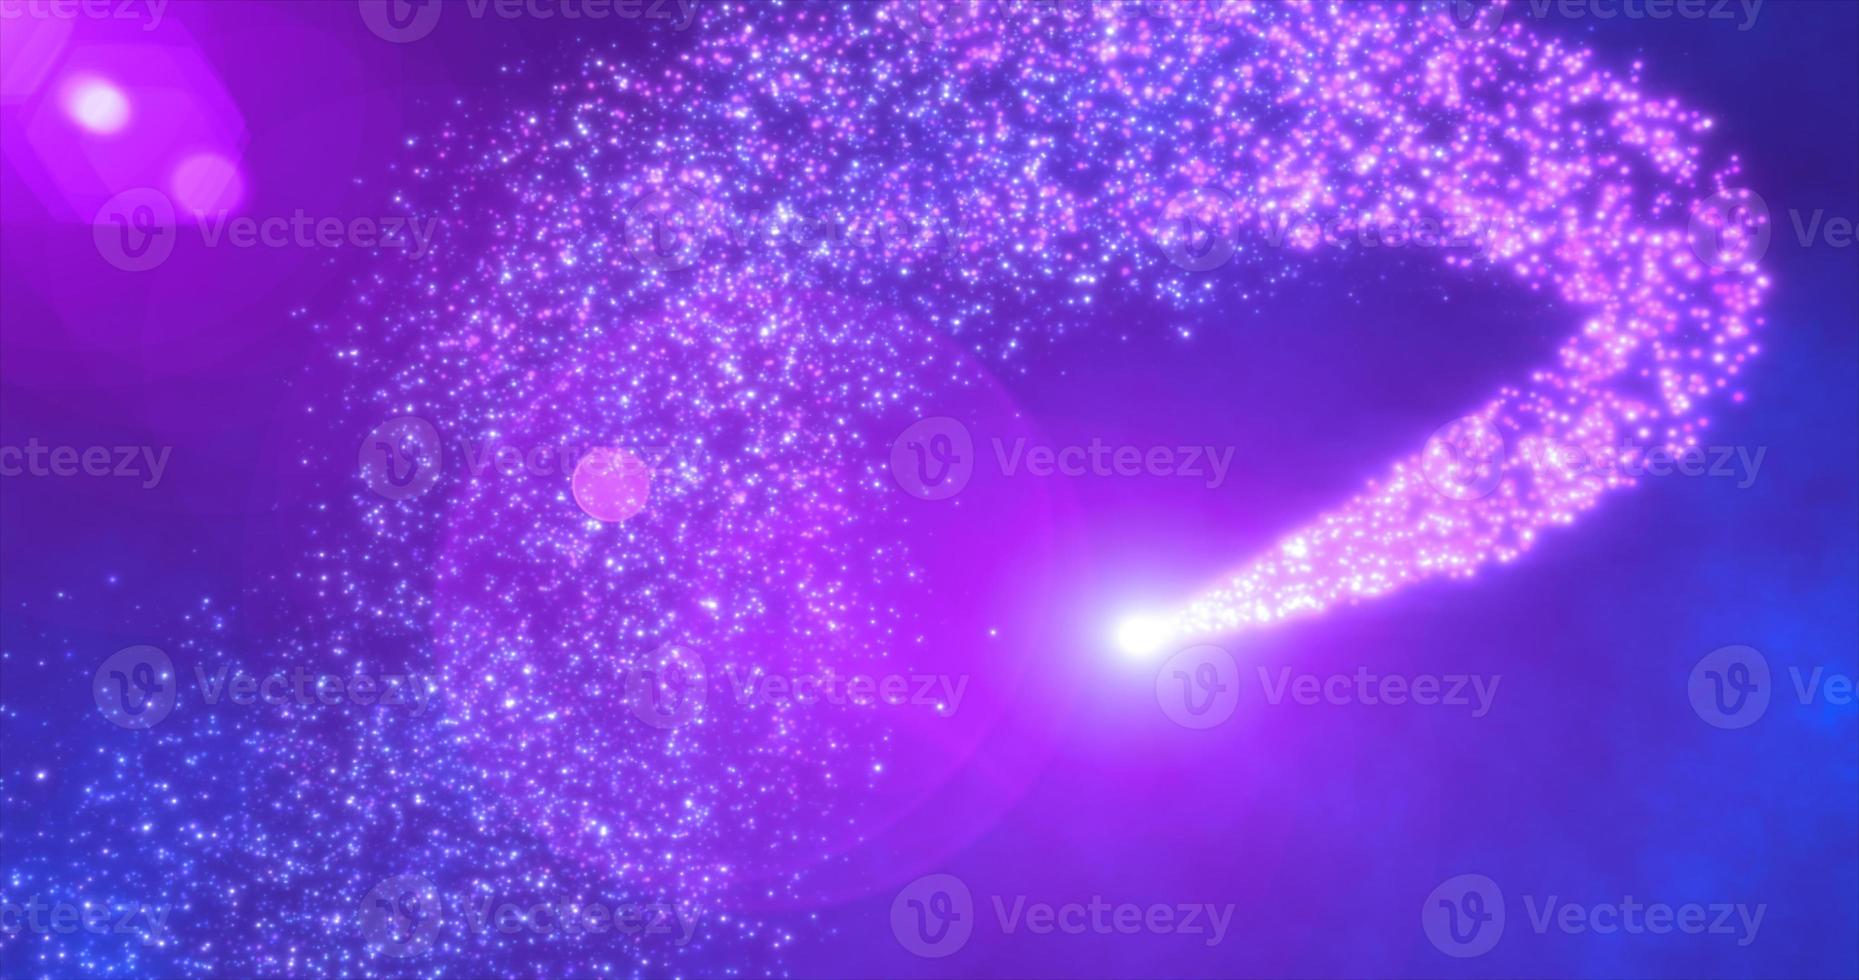 Abstract flying line particles purple bright glowing magical energy particles, abstract background photo